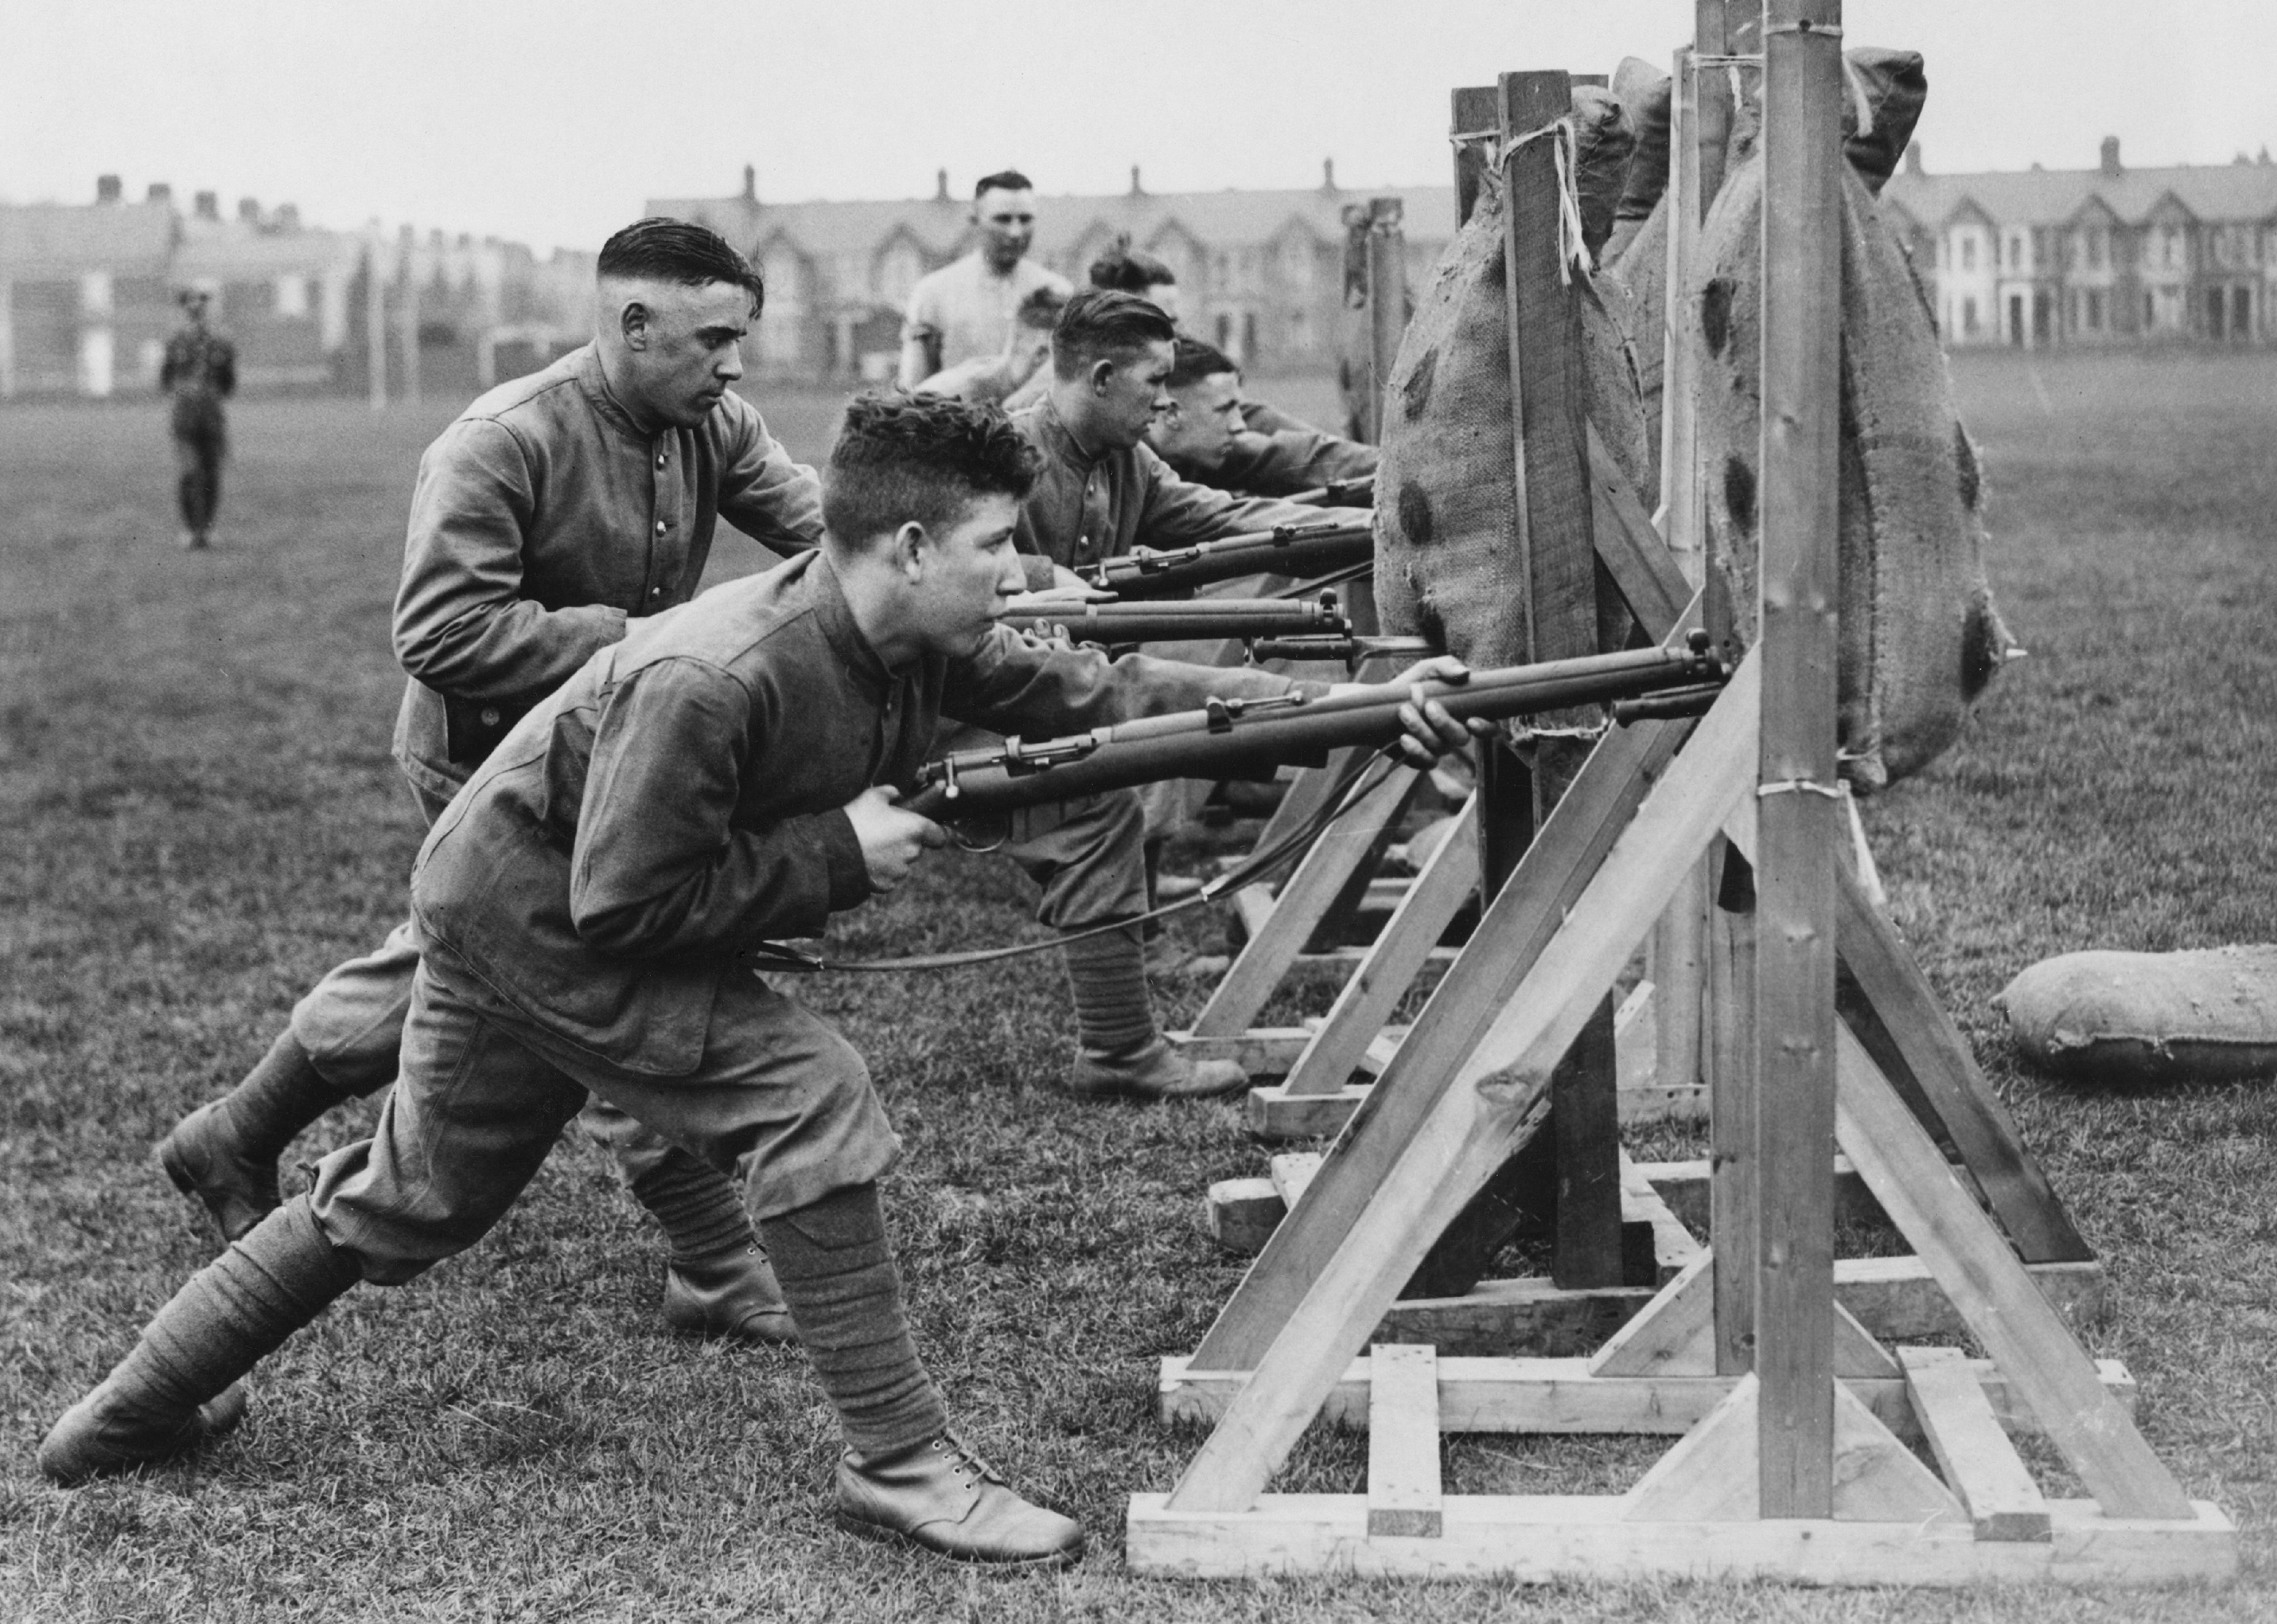 Soldiers undertake bayonet thrust practice against straw filled dummies using a bolt action rifle.